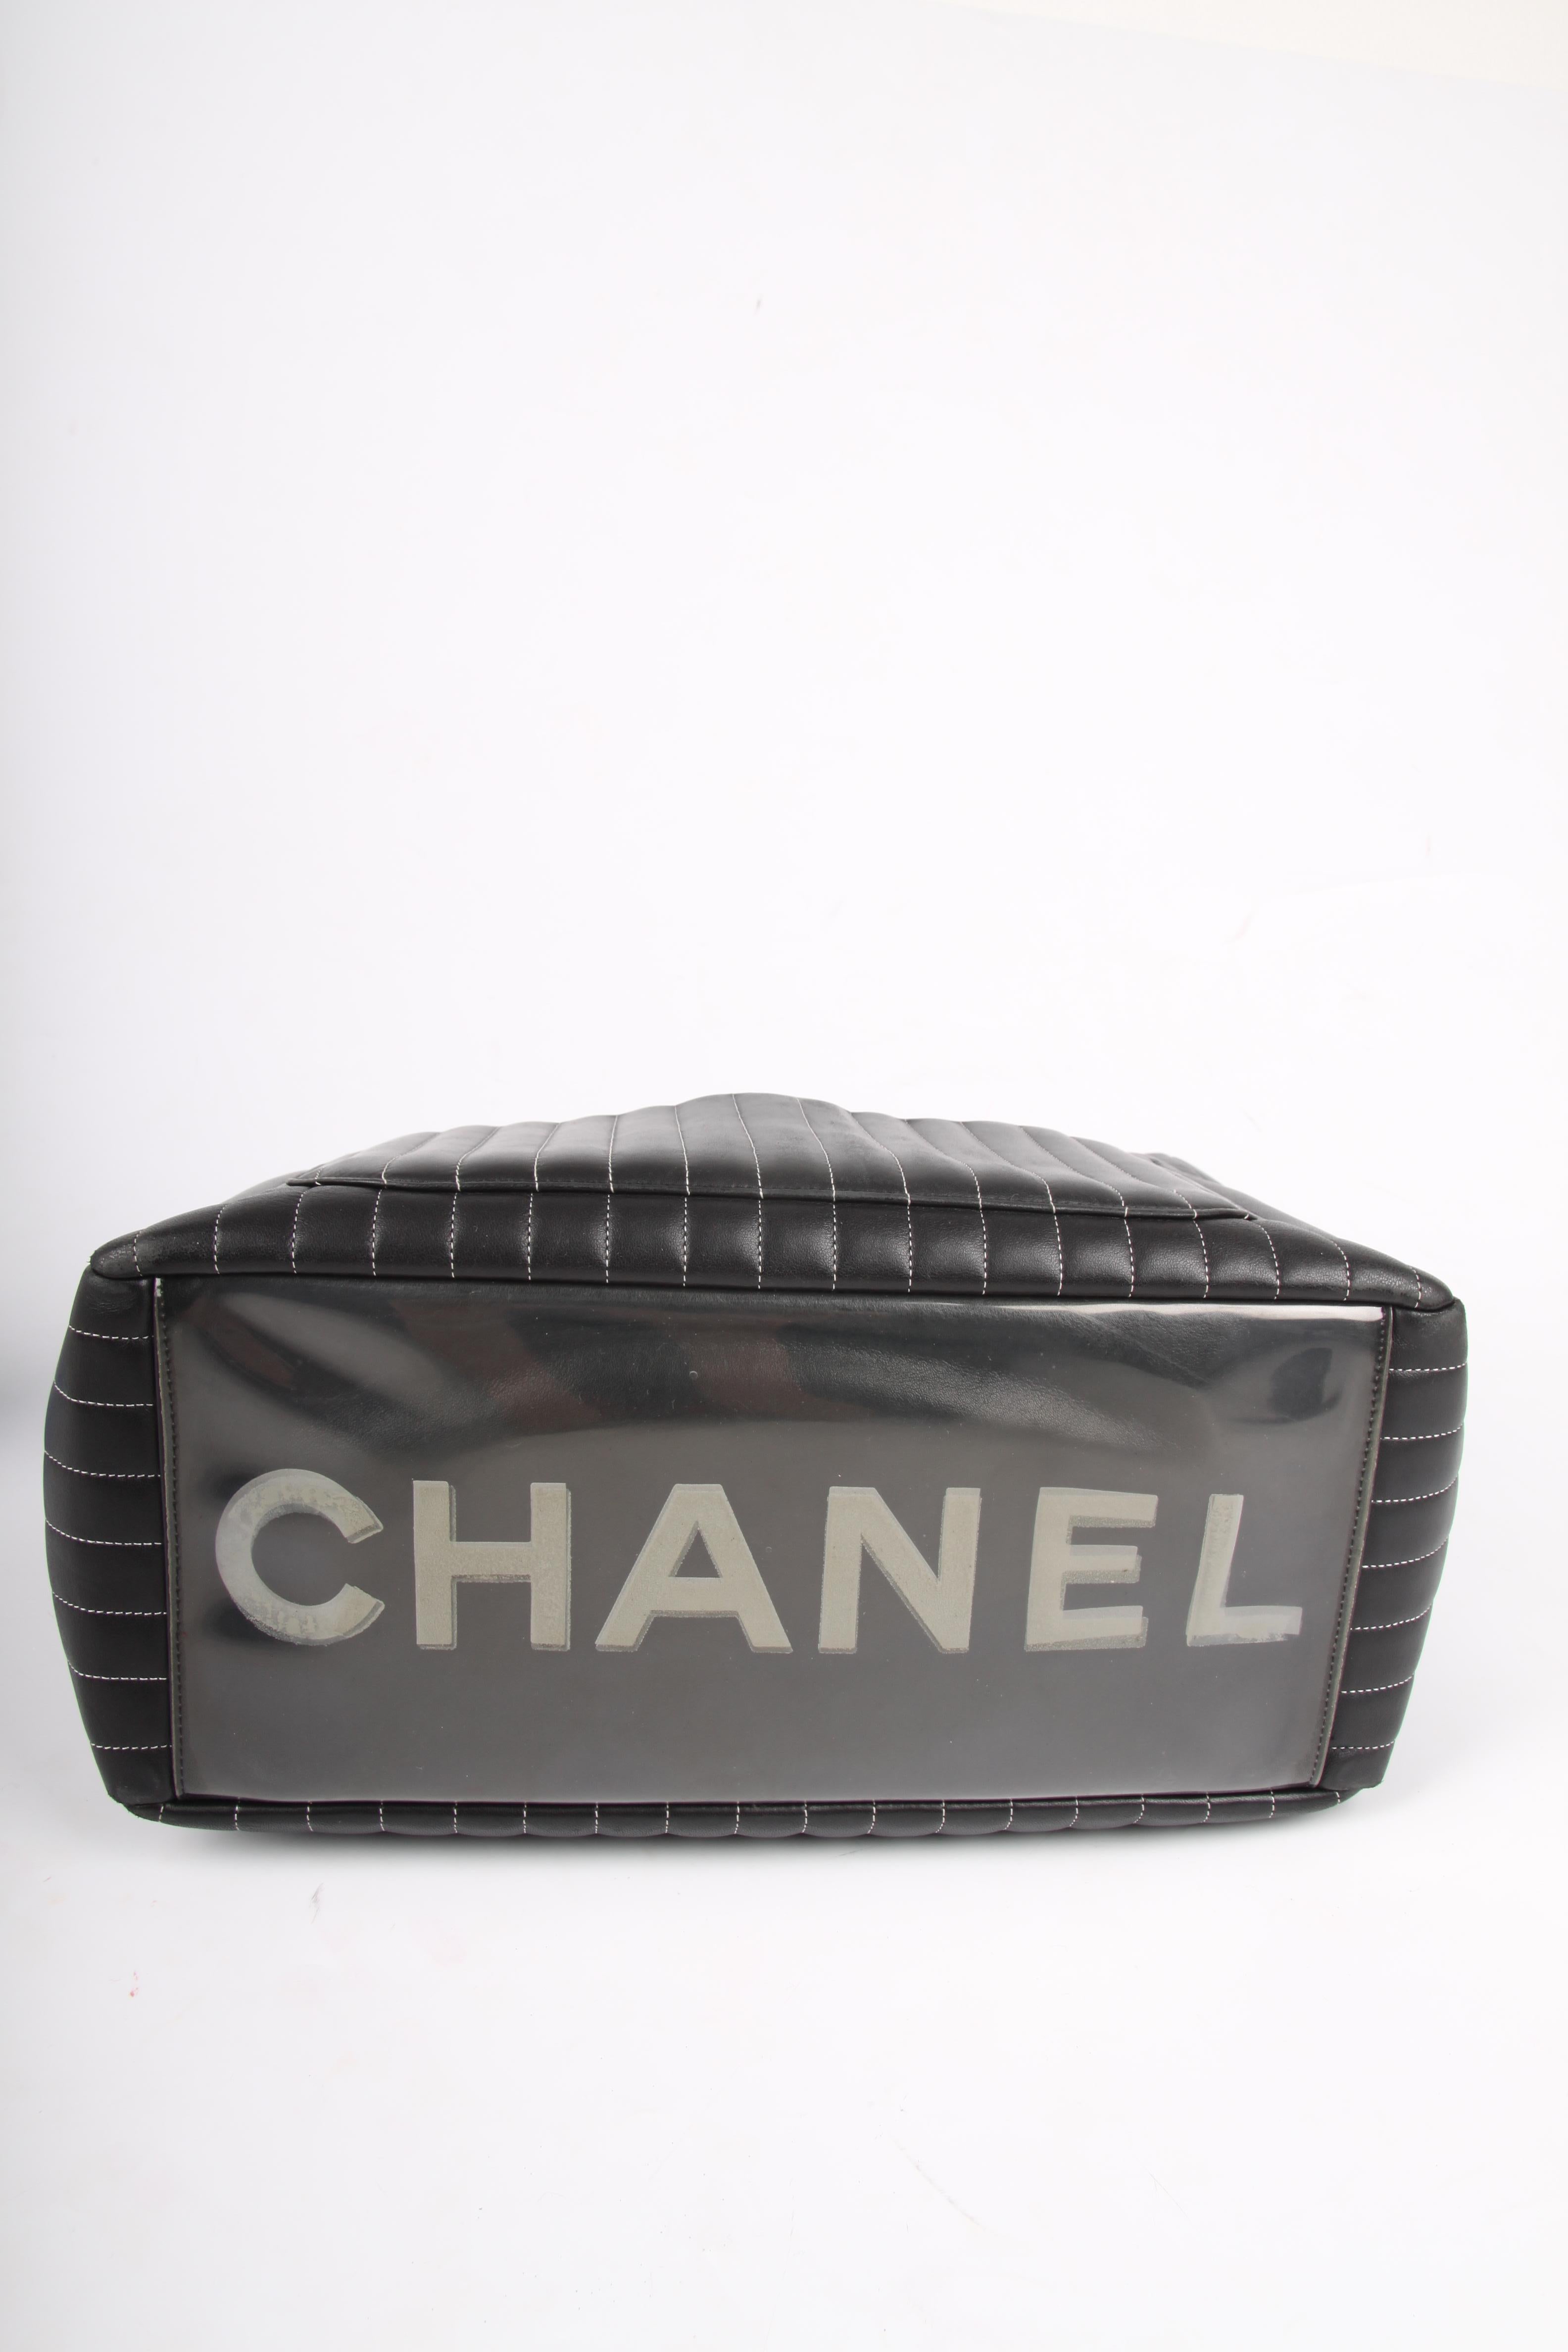 This one is very special! It is the Mademoiselle Vertically Quilted Shopper by Chanel. Nice!!

Crafted from black lambskin leather embellished with white vertical stitching, silver-tone hardware and a patch pocket on the exterior. The bottom is made